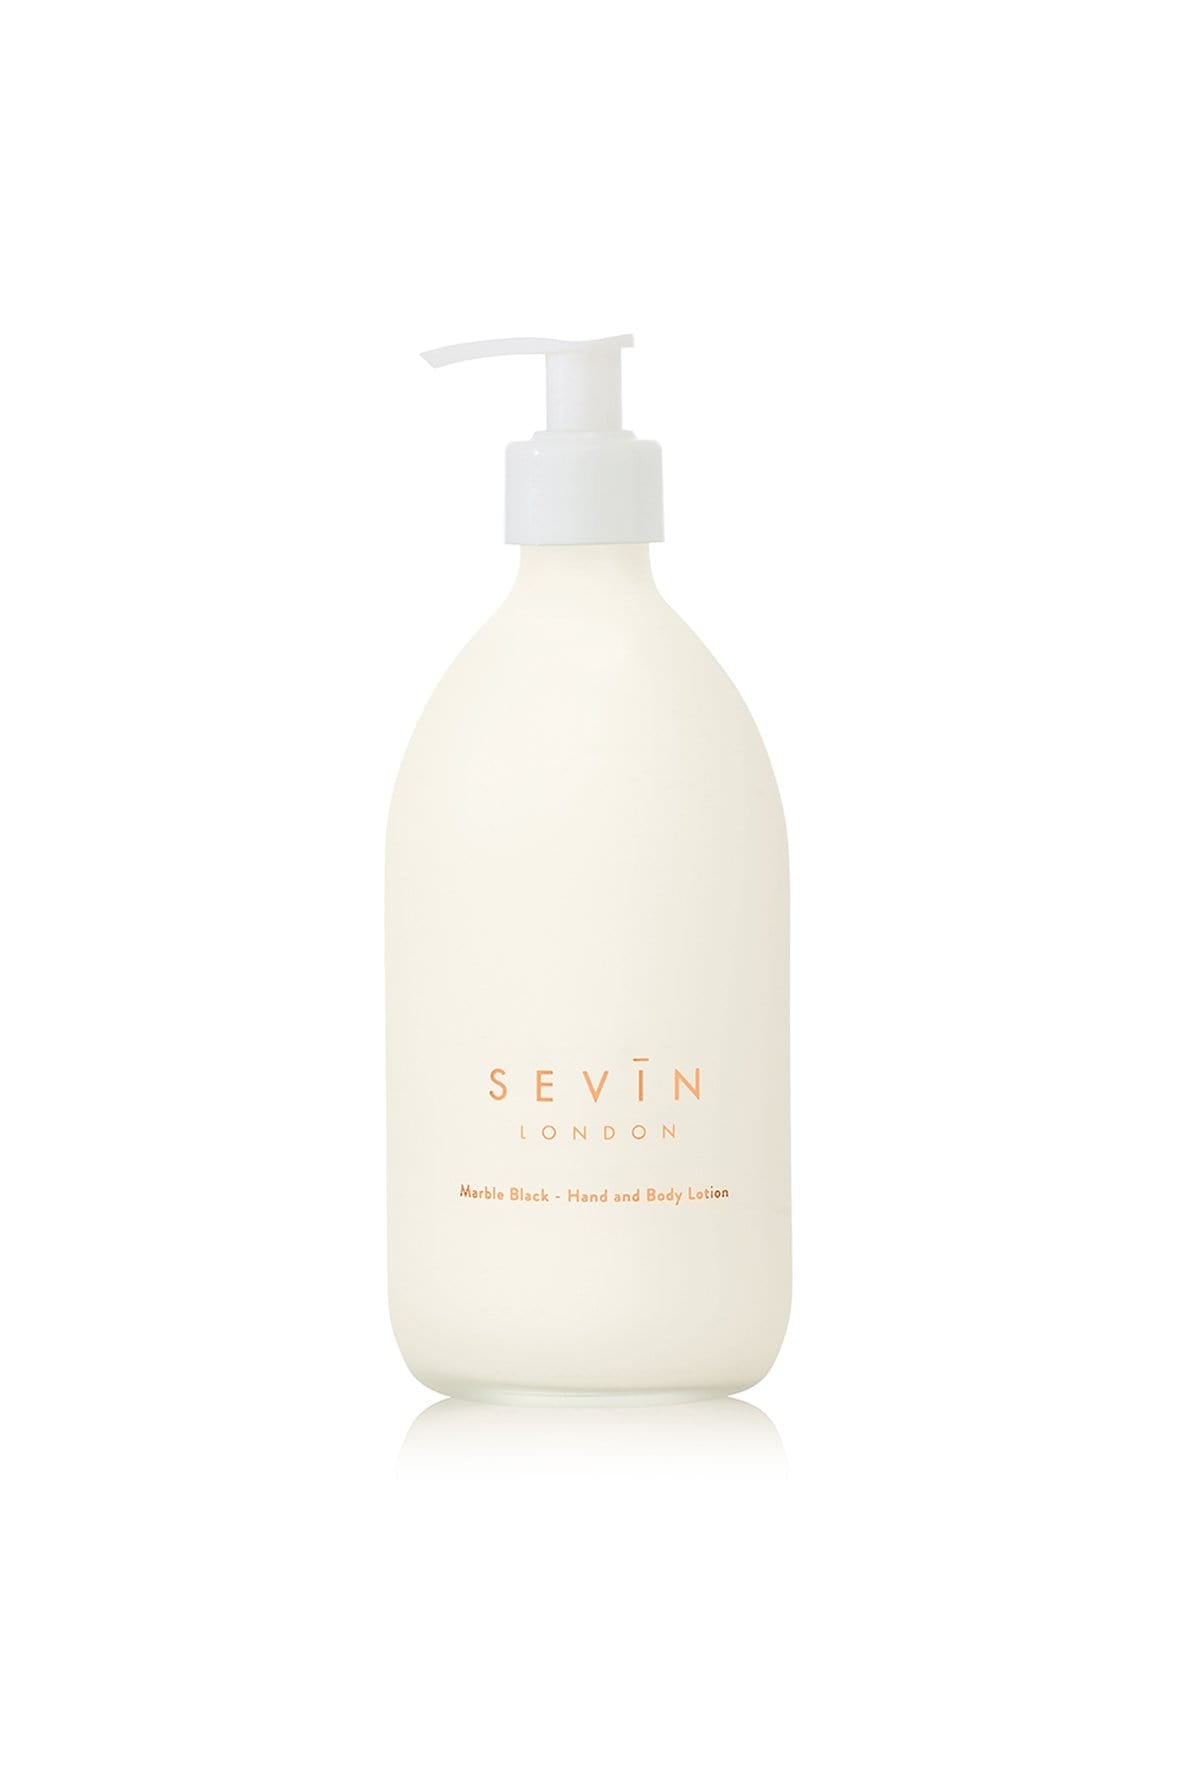 Sevin London 500ml Marble Black Hand and Body Lotion